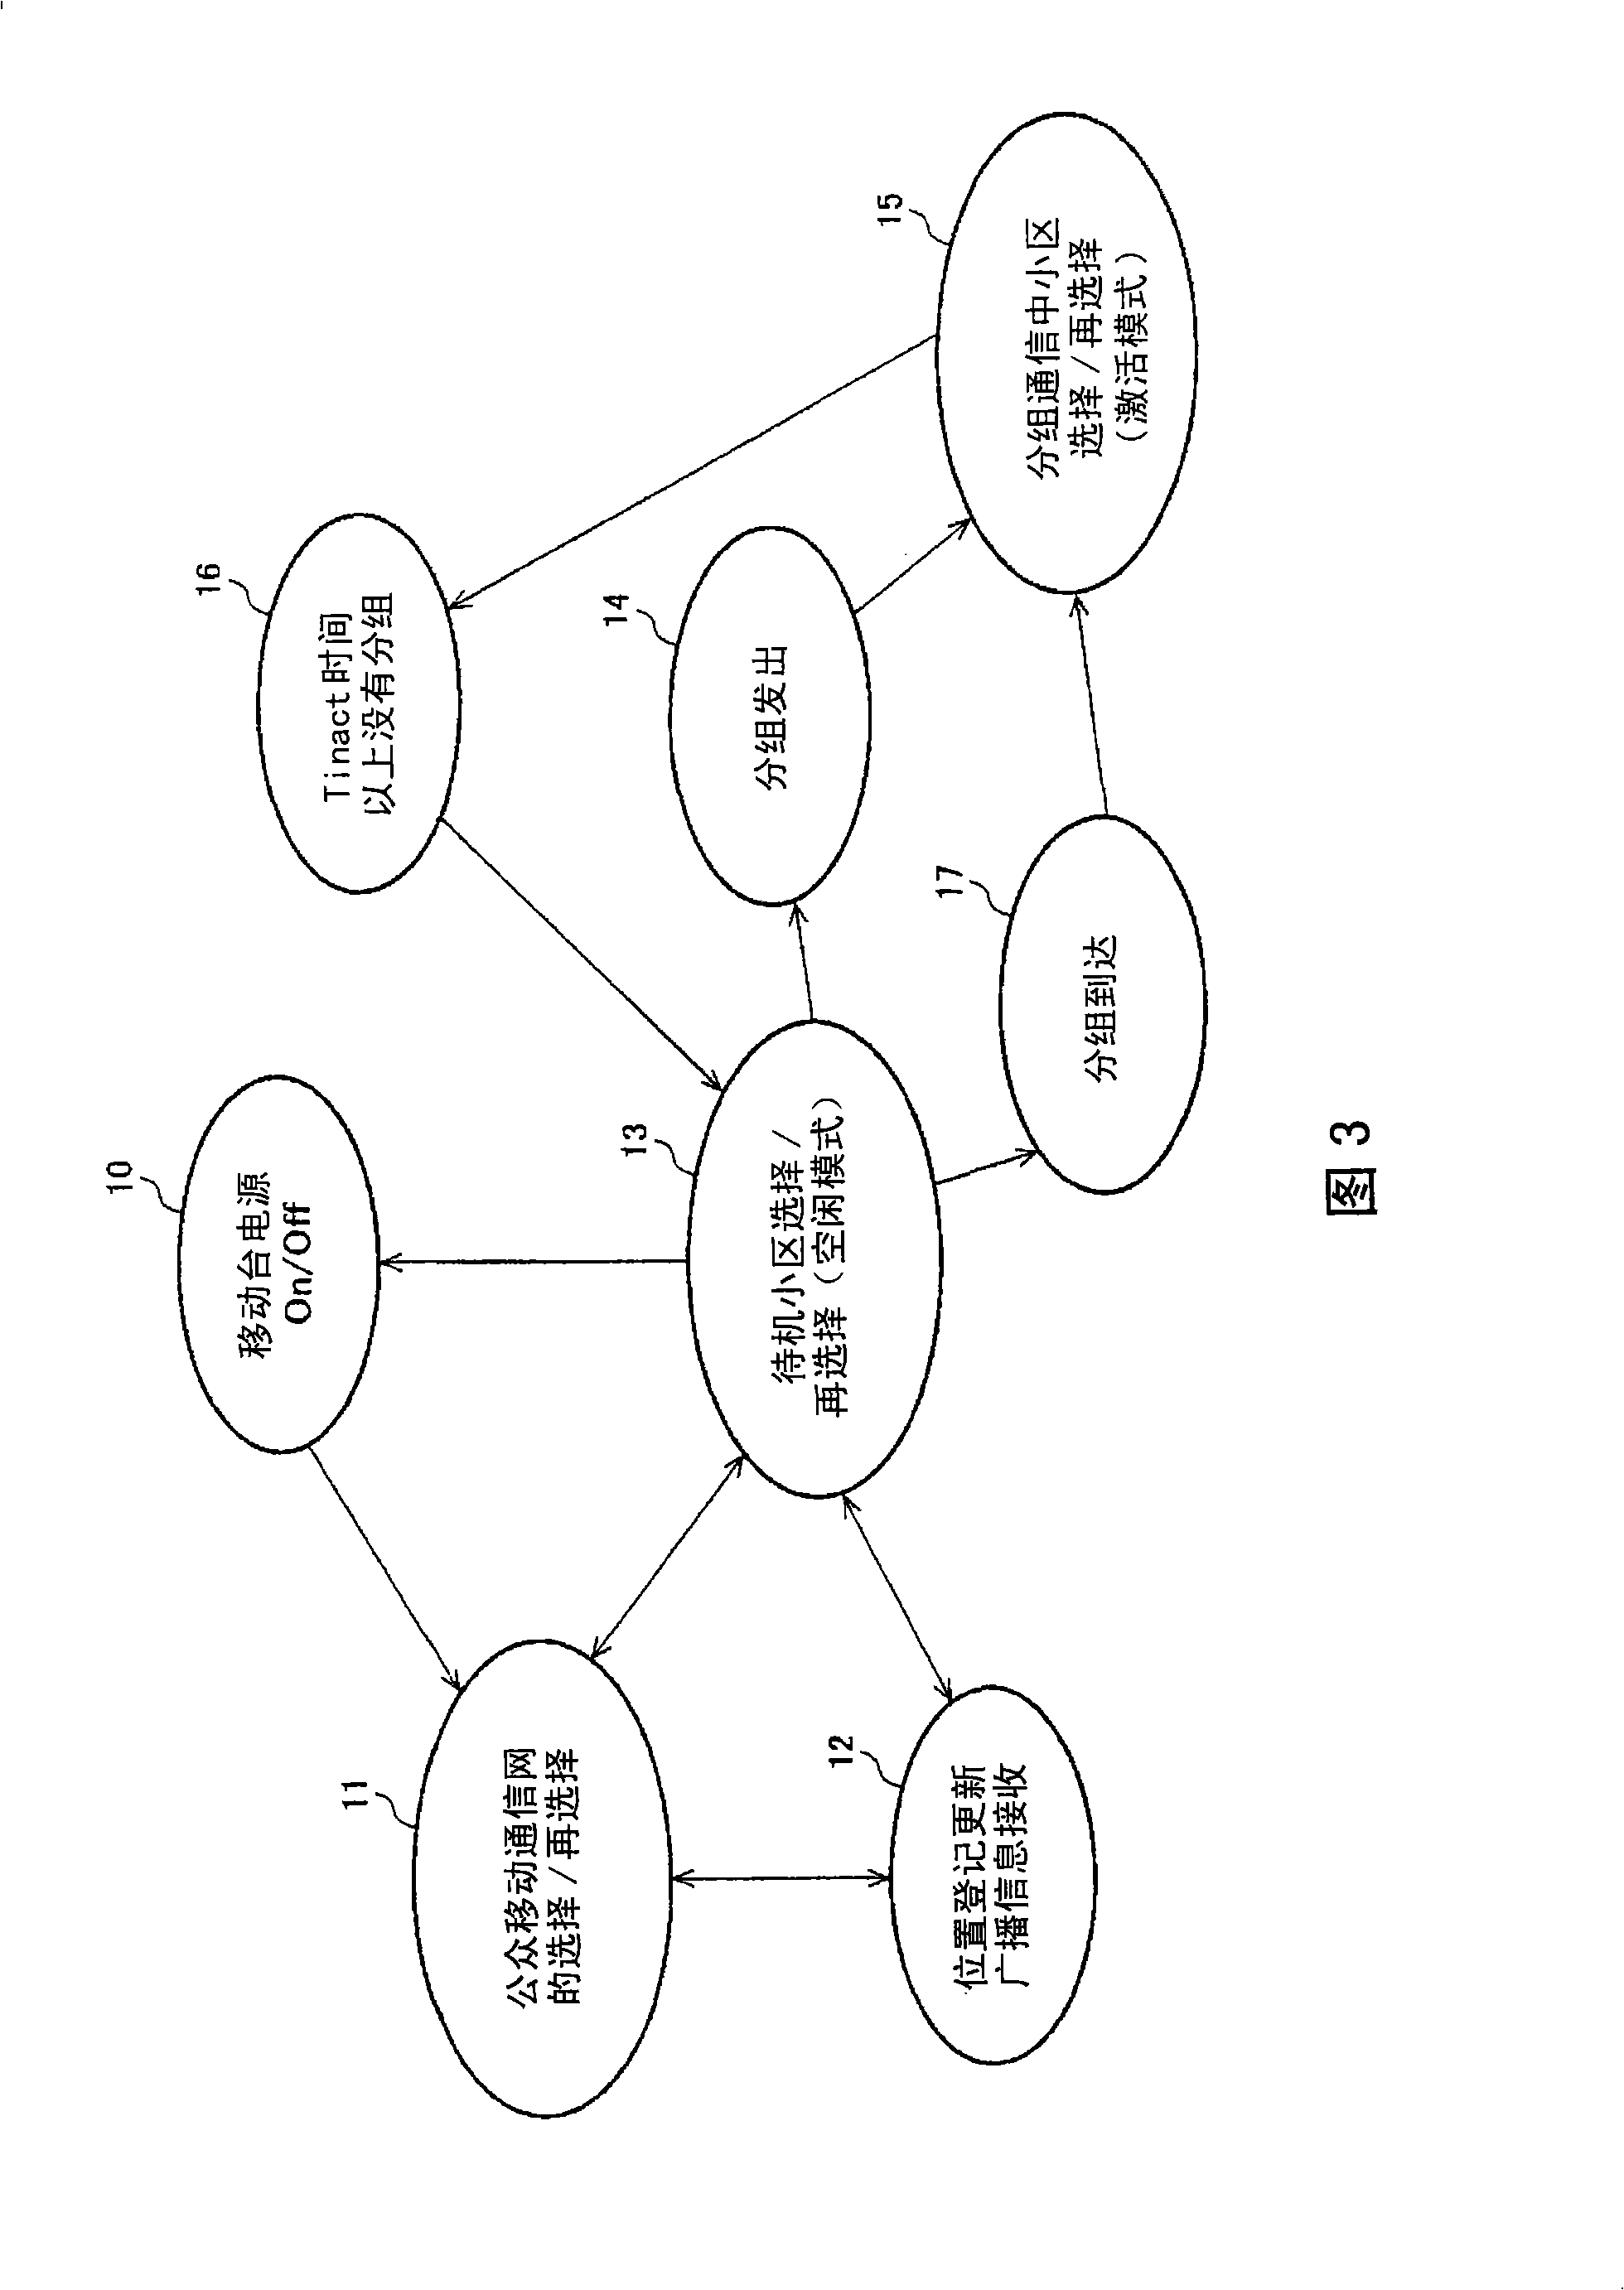 Mobile station device, base station device, mobile station device operating frequency band mapping method, location management device, mobile station device location registration method, paging method